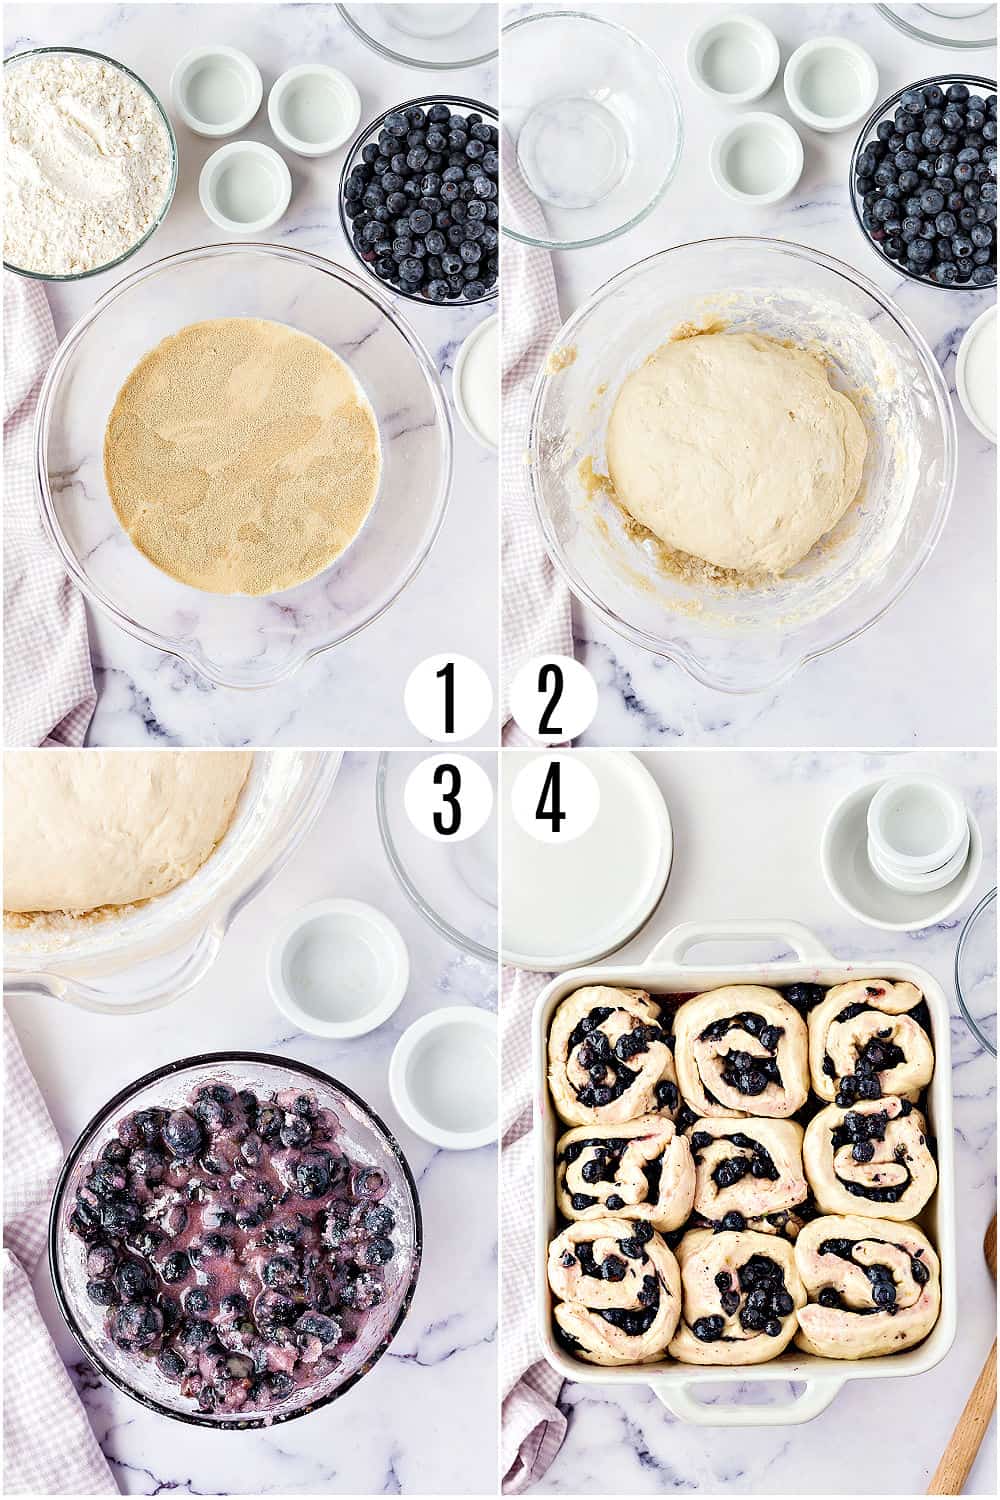 Step by step photos showing how to make blueberry rolls.